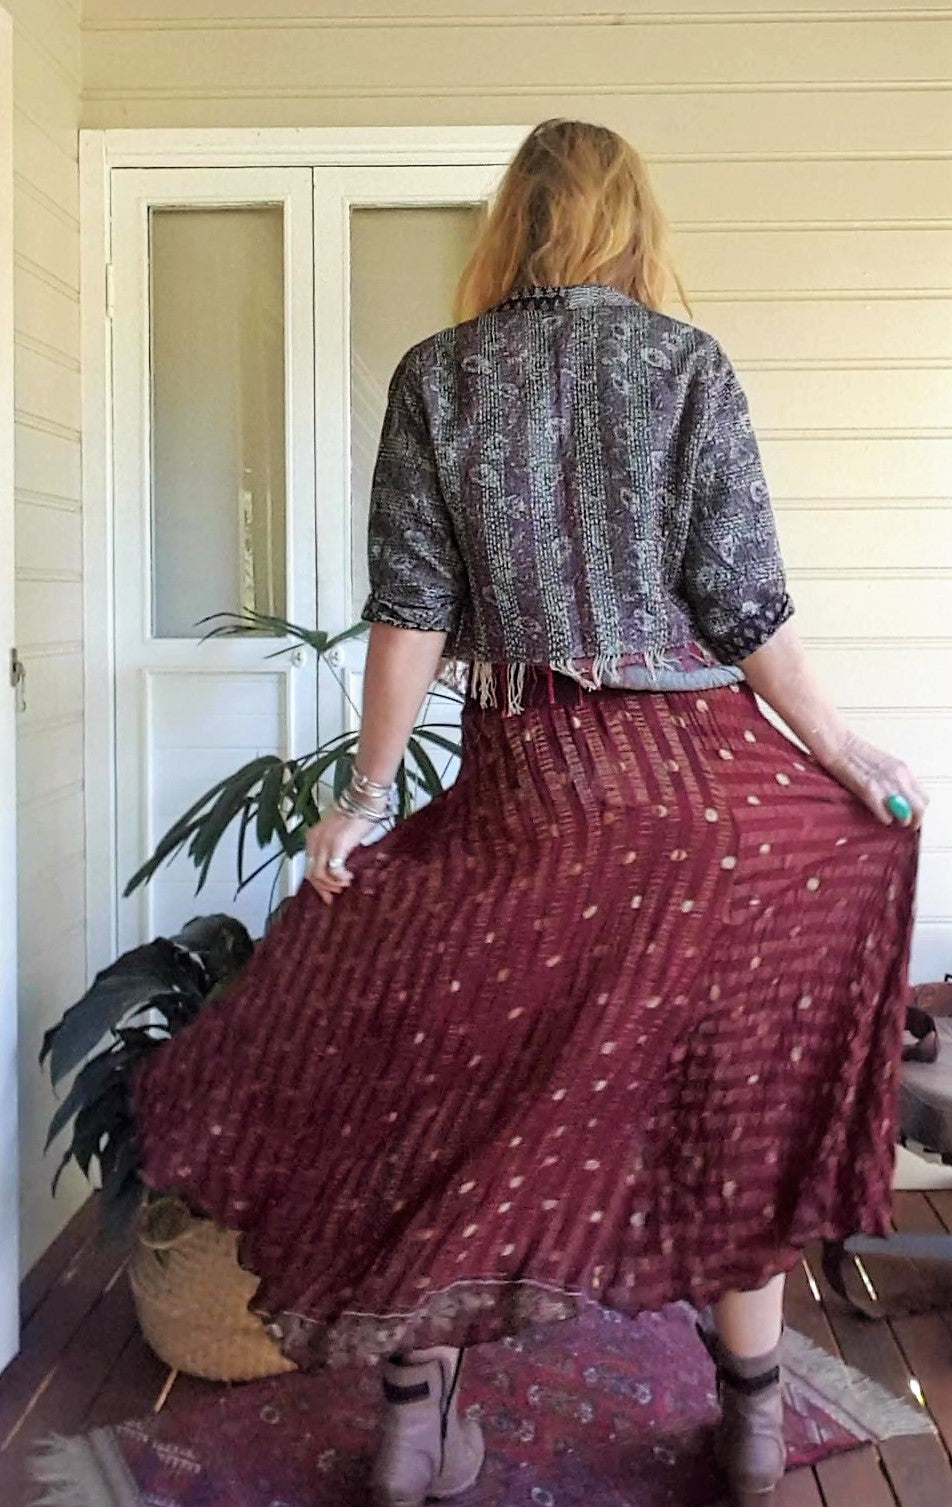 Rear view of skirt